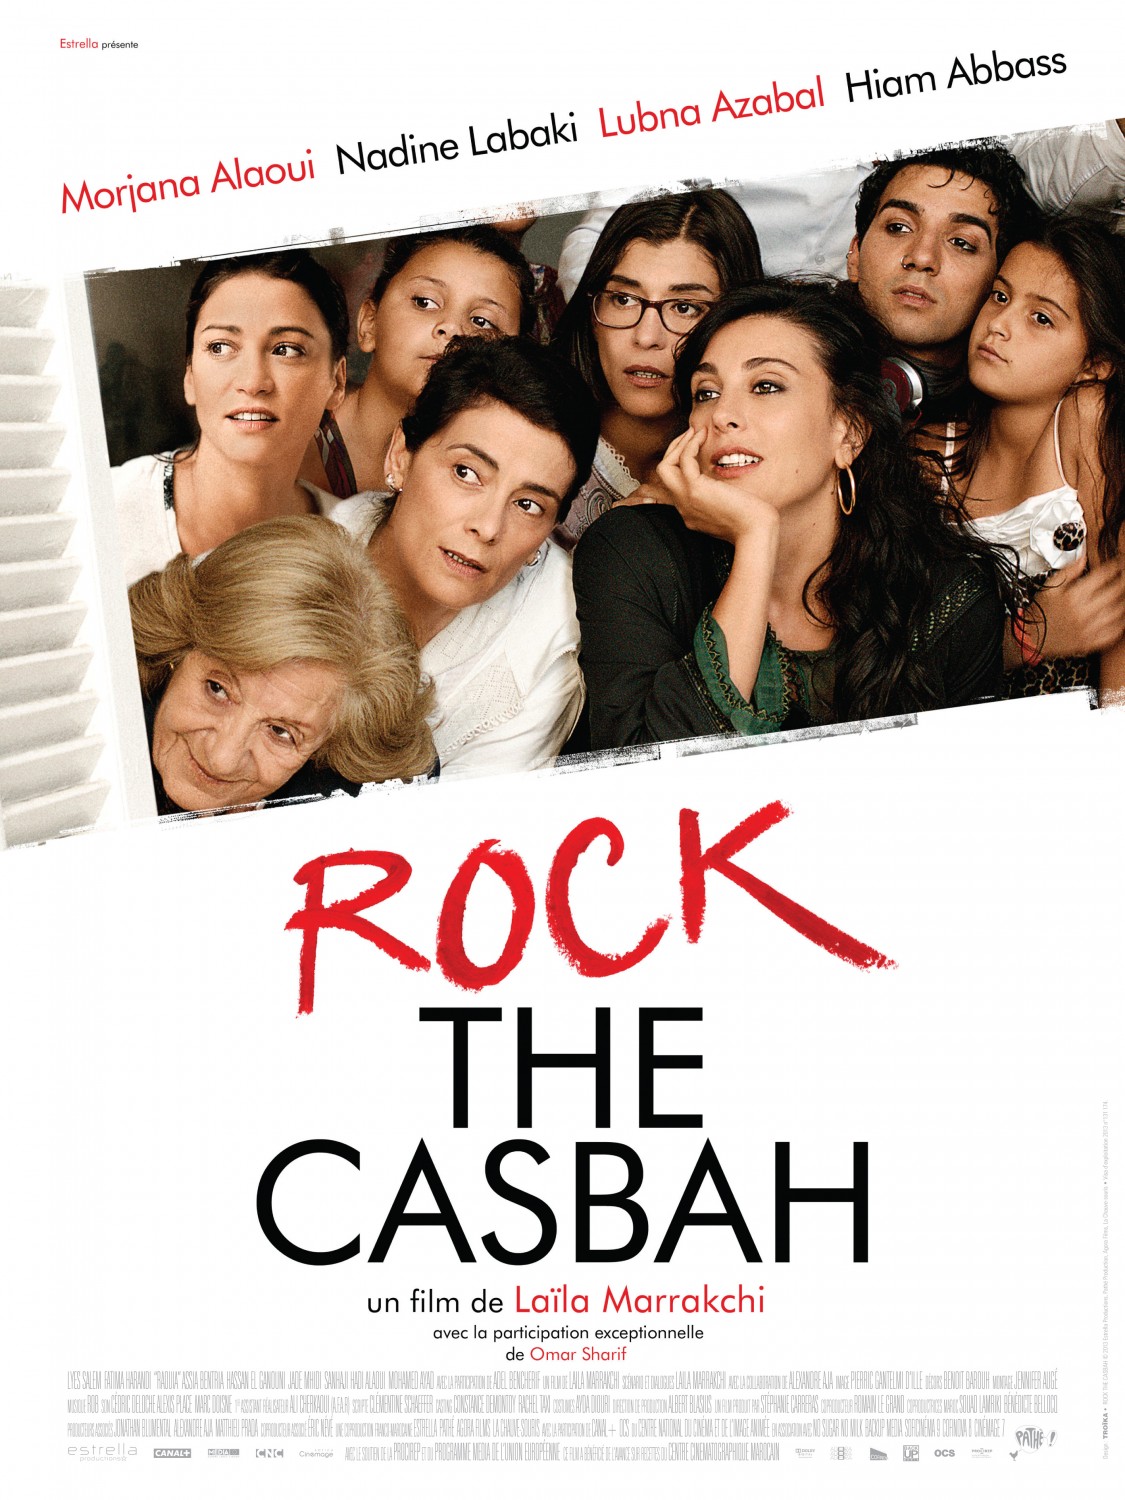 Extra Large Movie Poster Image for Rock the Casbah 